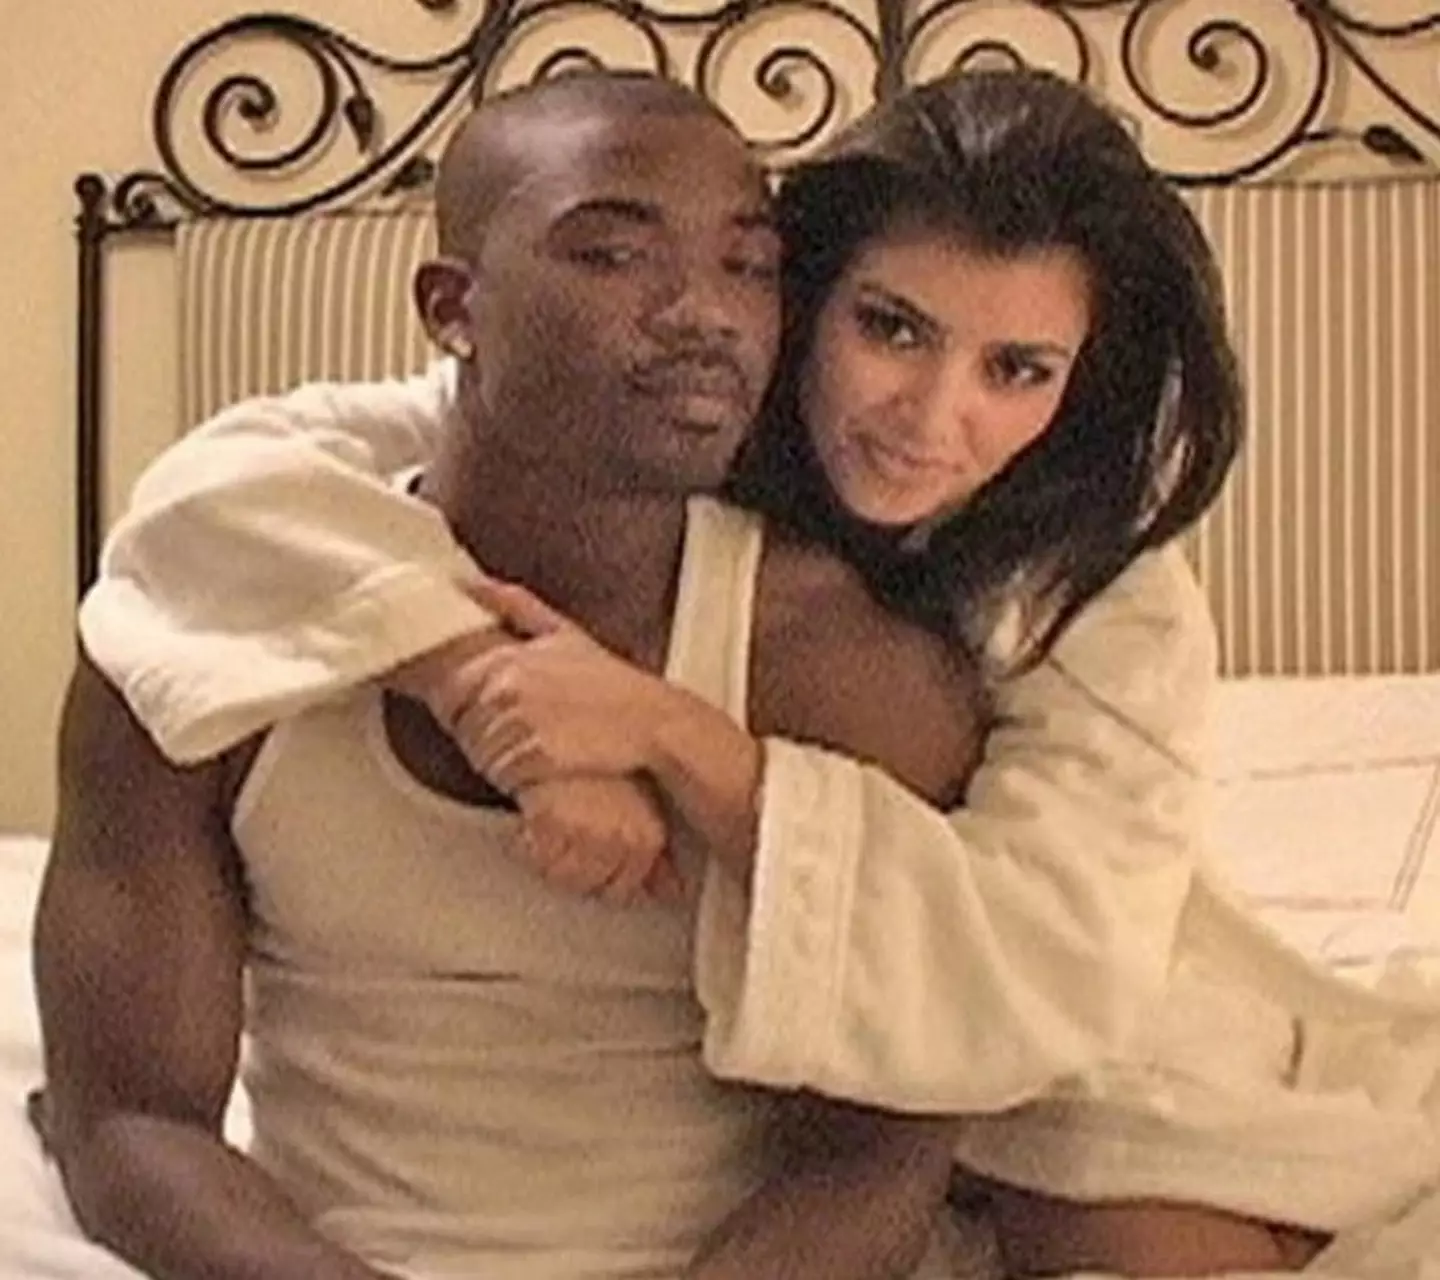 Kim Kardashian and Ray J's sex tape released in 2007.